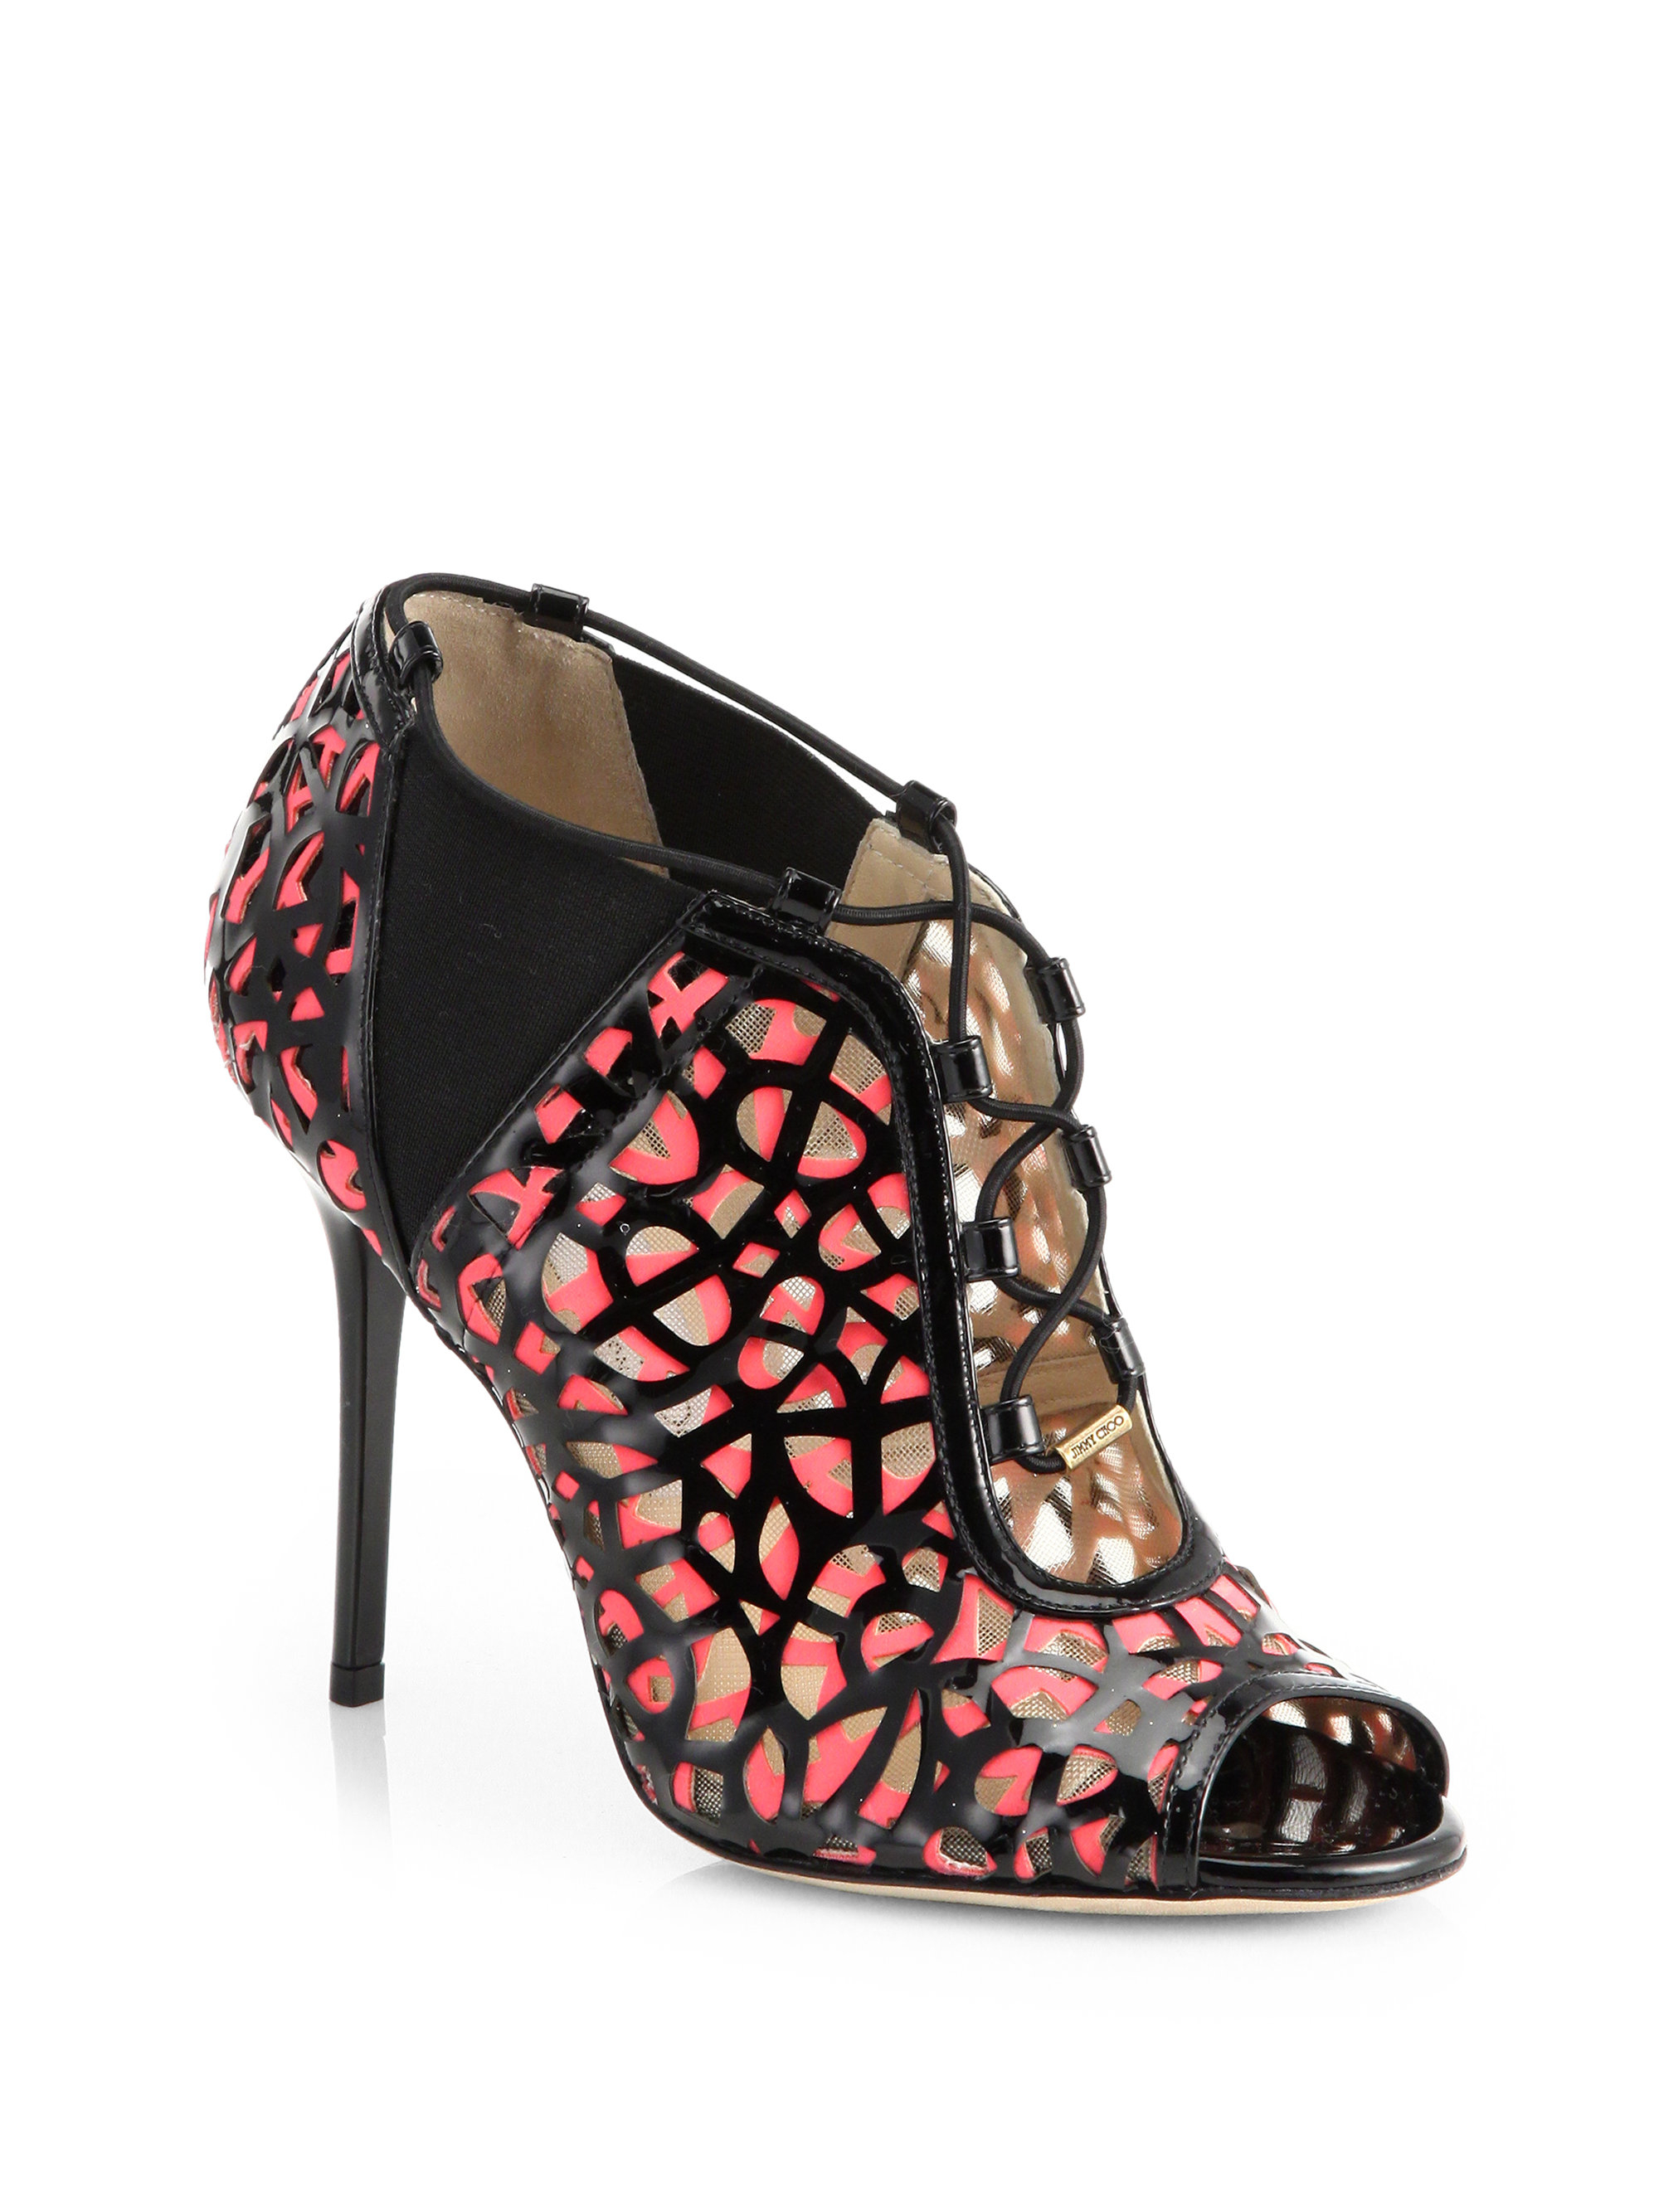 Lyst - Jimmy choo Tactic Laser-cut Patent Leather Peep-toe Booties in Black